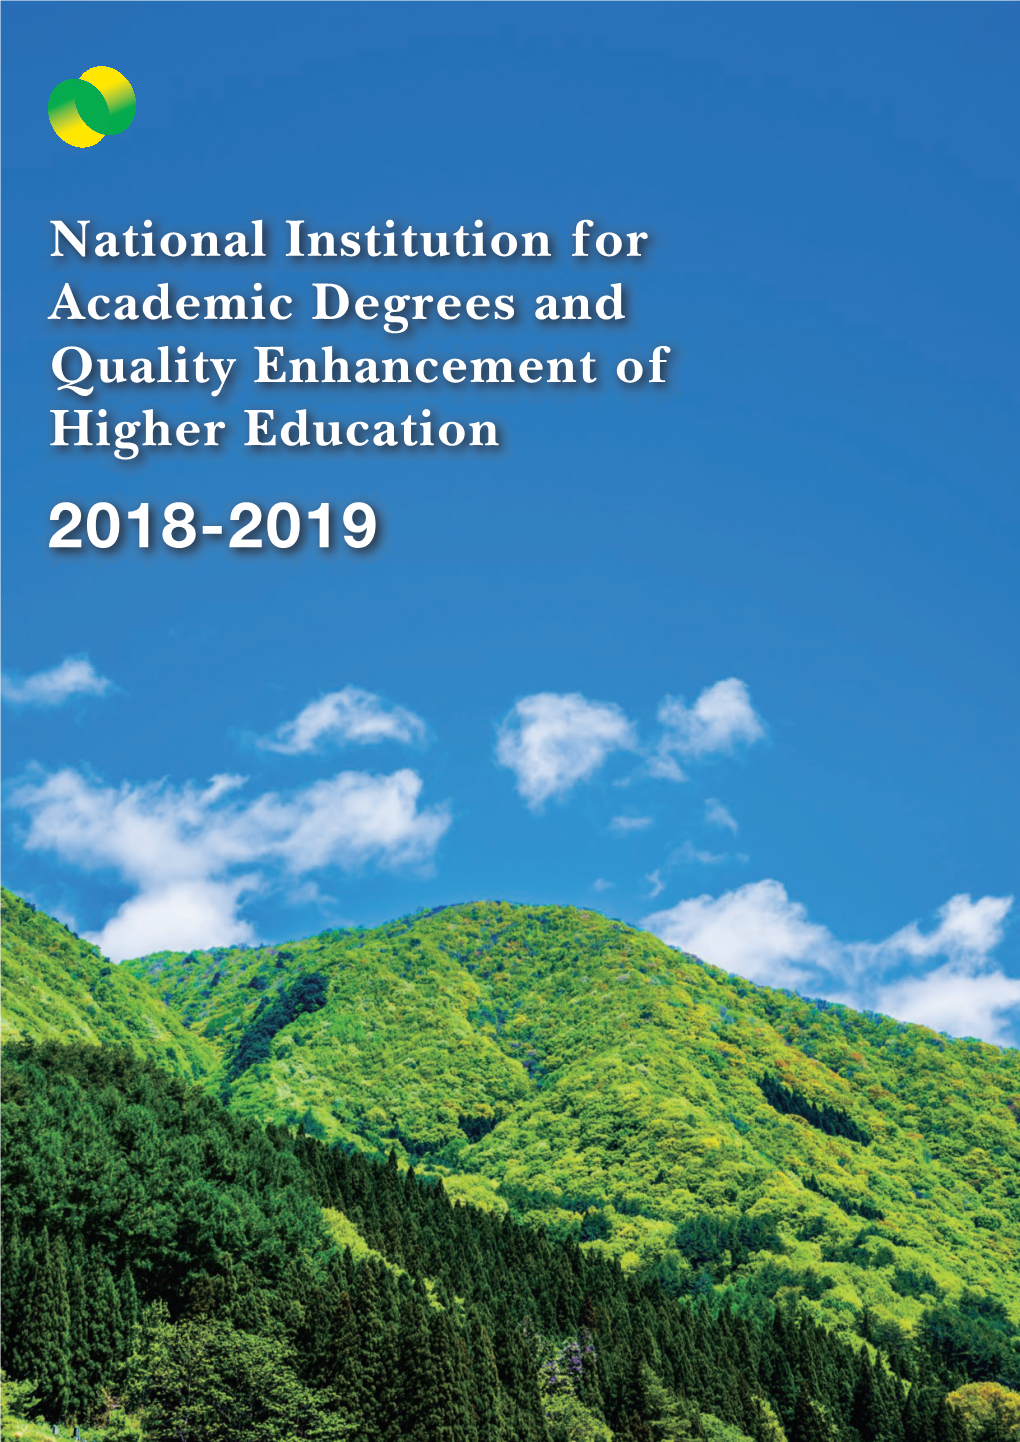 National Institution for Academic Degrees and Quality Enhancement of Higher Education 2018-2019